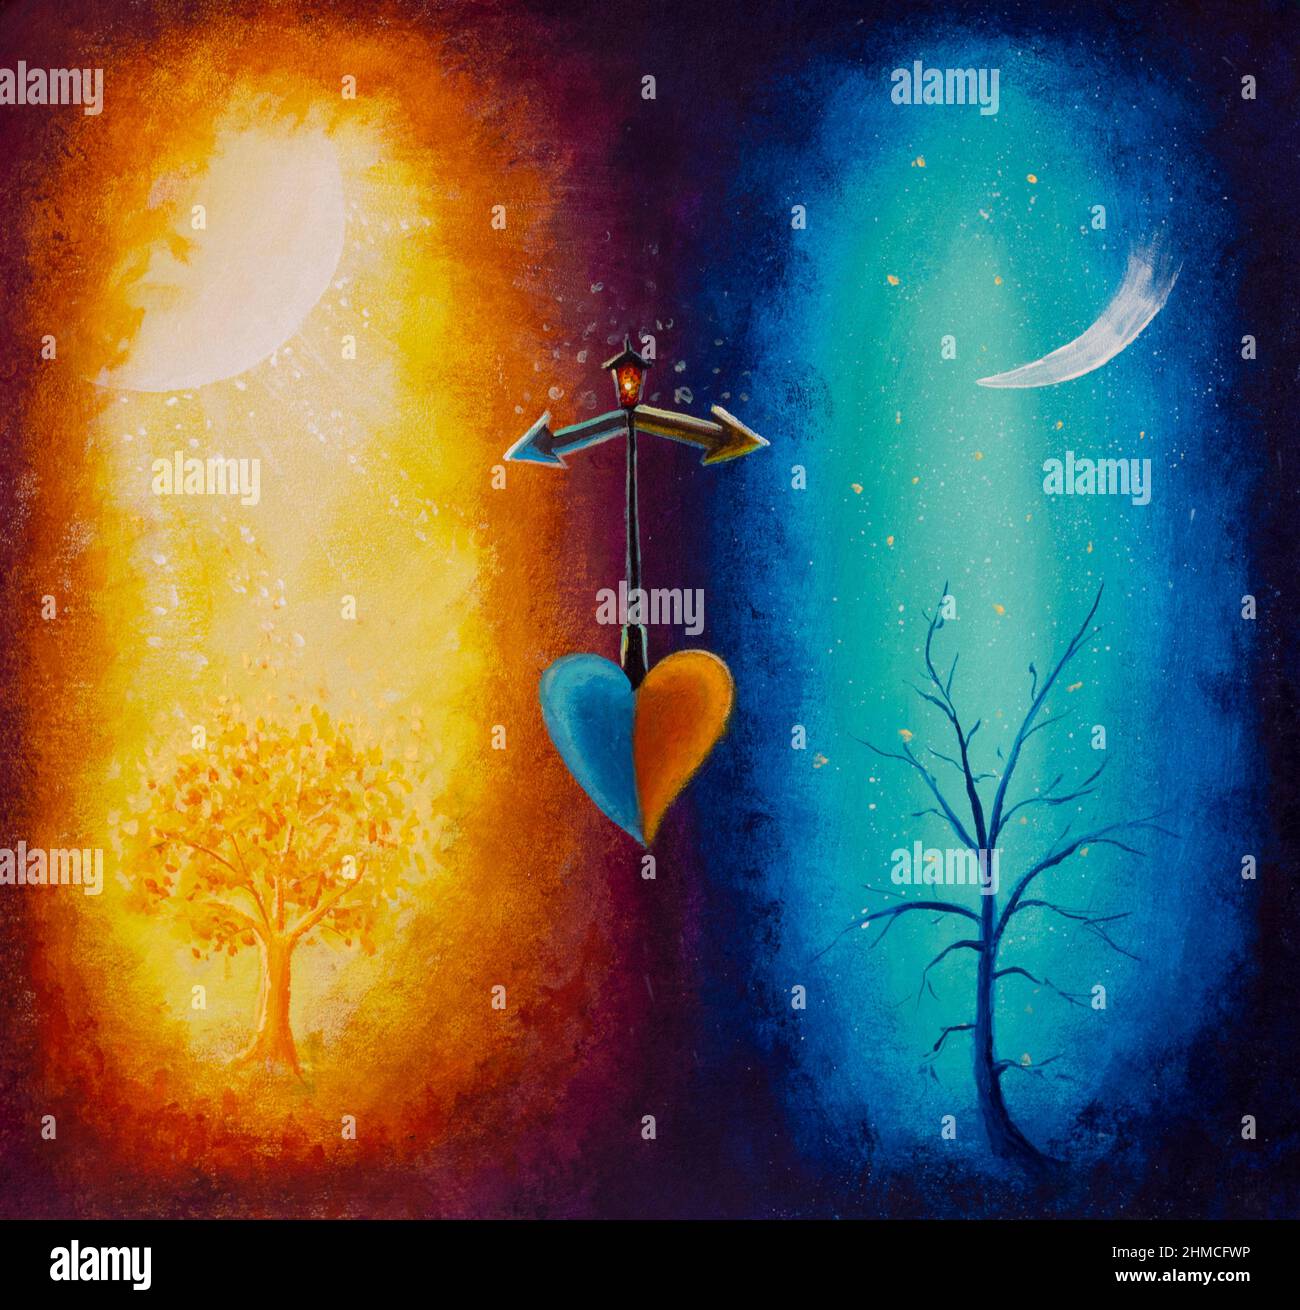 Choice of heart concept Acrylic painting harmony illustration The concept of opposite energies: male-female, day-night, light-dark, yin-yang Stock Photo